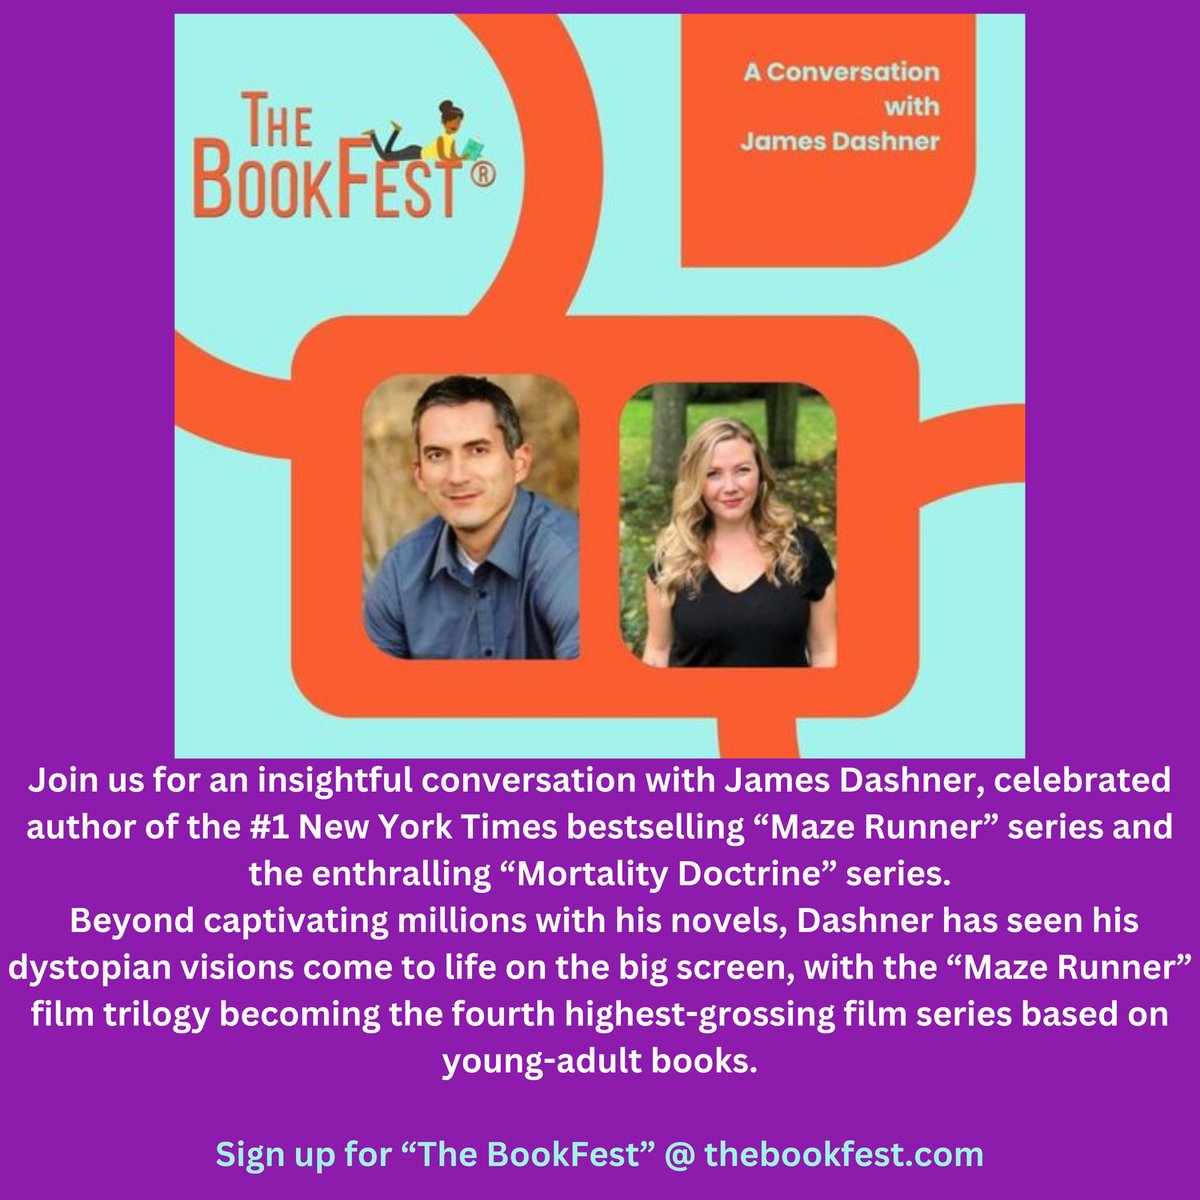 The BookFest is this weekend! Don't worry you haven't missed out, it's online and you can still register and hear from authors like @jamesdashner !! You can register @ thebookfest.com today! #books #bookish #thebookfestspring2024 #bookpodcast #jamesdashner